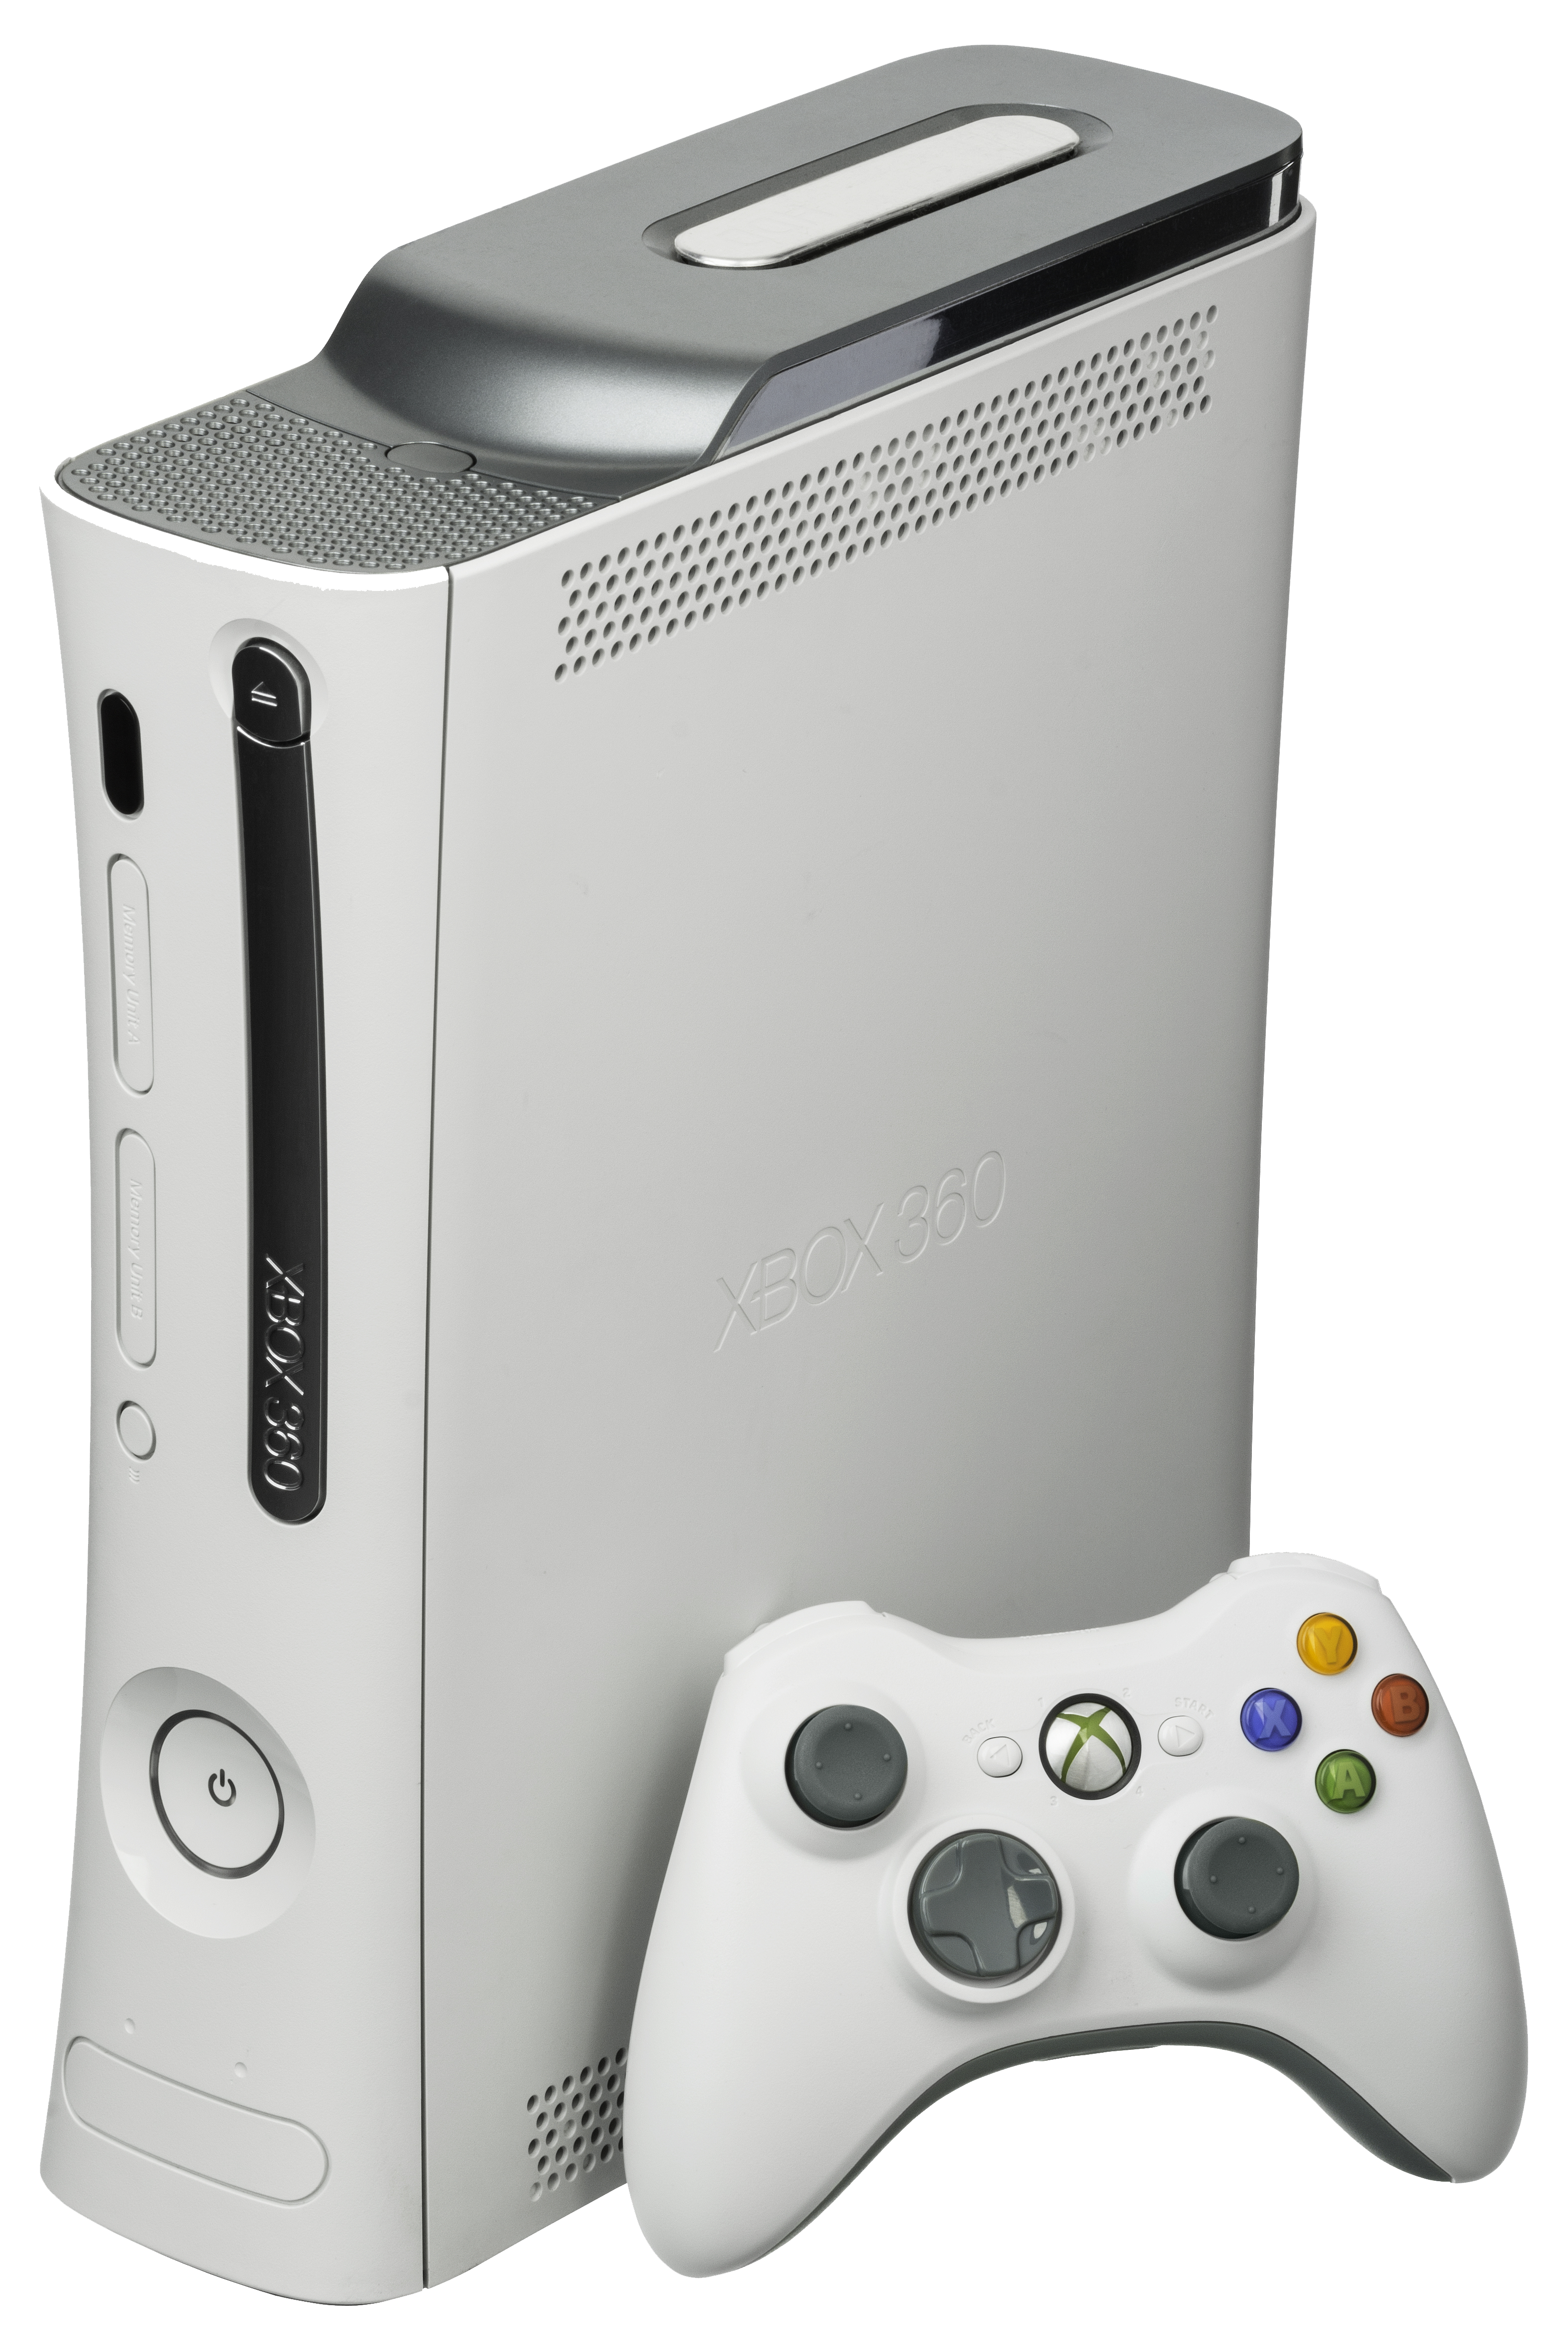 File:Xbox360.png